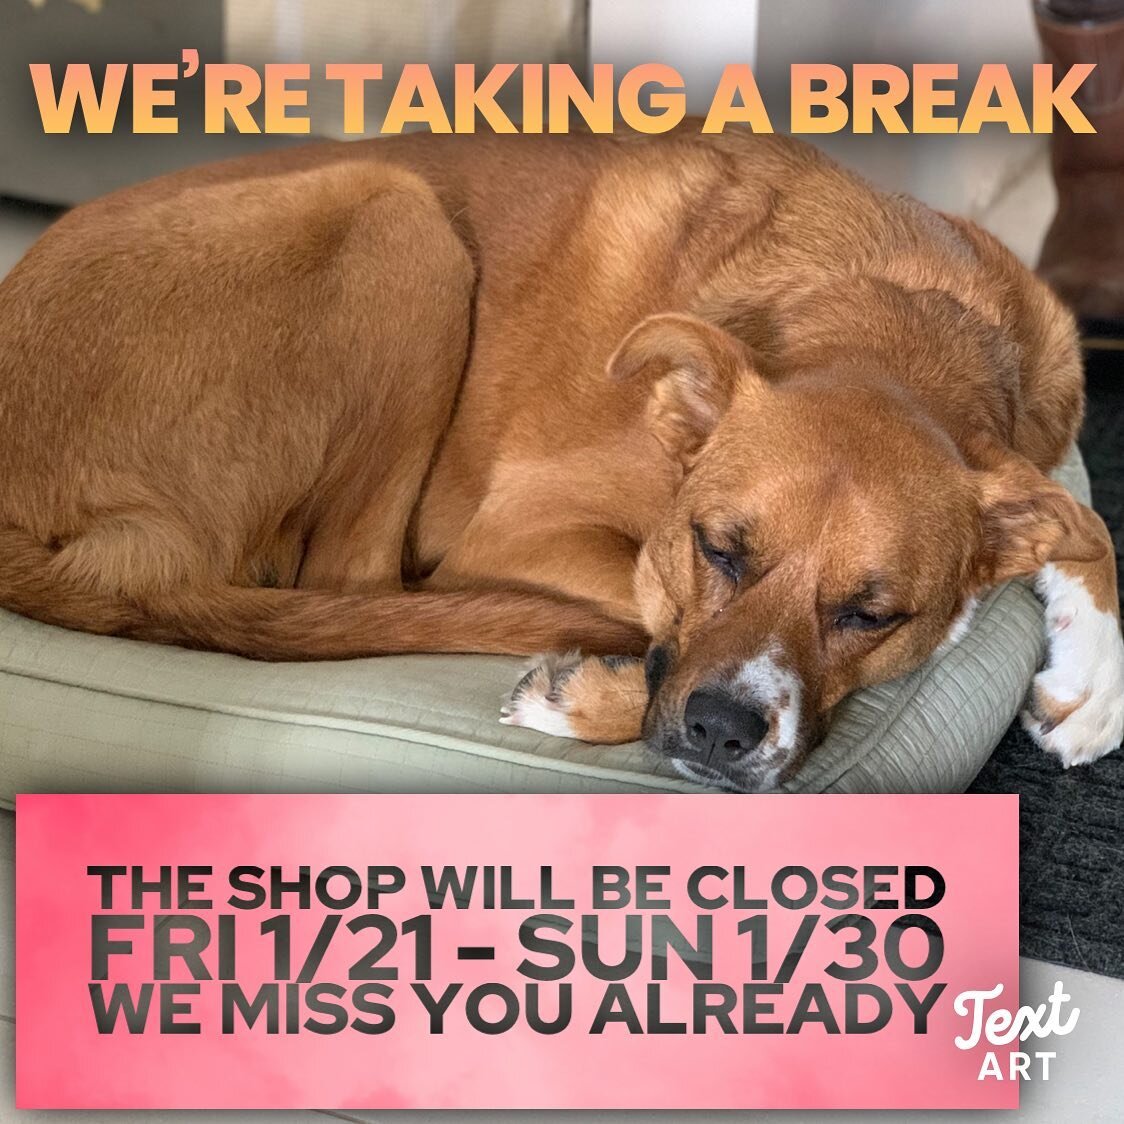 We are closing the shop for a little break! We&rsquo;re open 11am-6pm Thursday, 1/20. We will be closed Friday, 1/21 through Sunday, 1/30. We will resume normal winter hours on Monday, 1/31. As always, we are available by phone and email, so please r